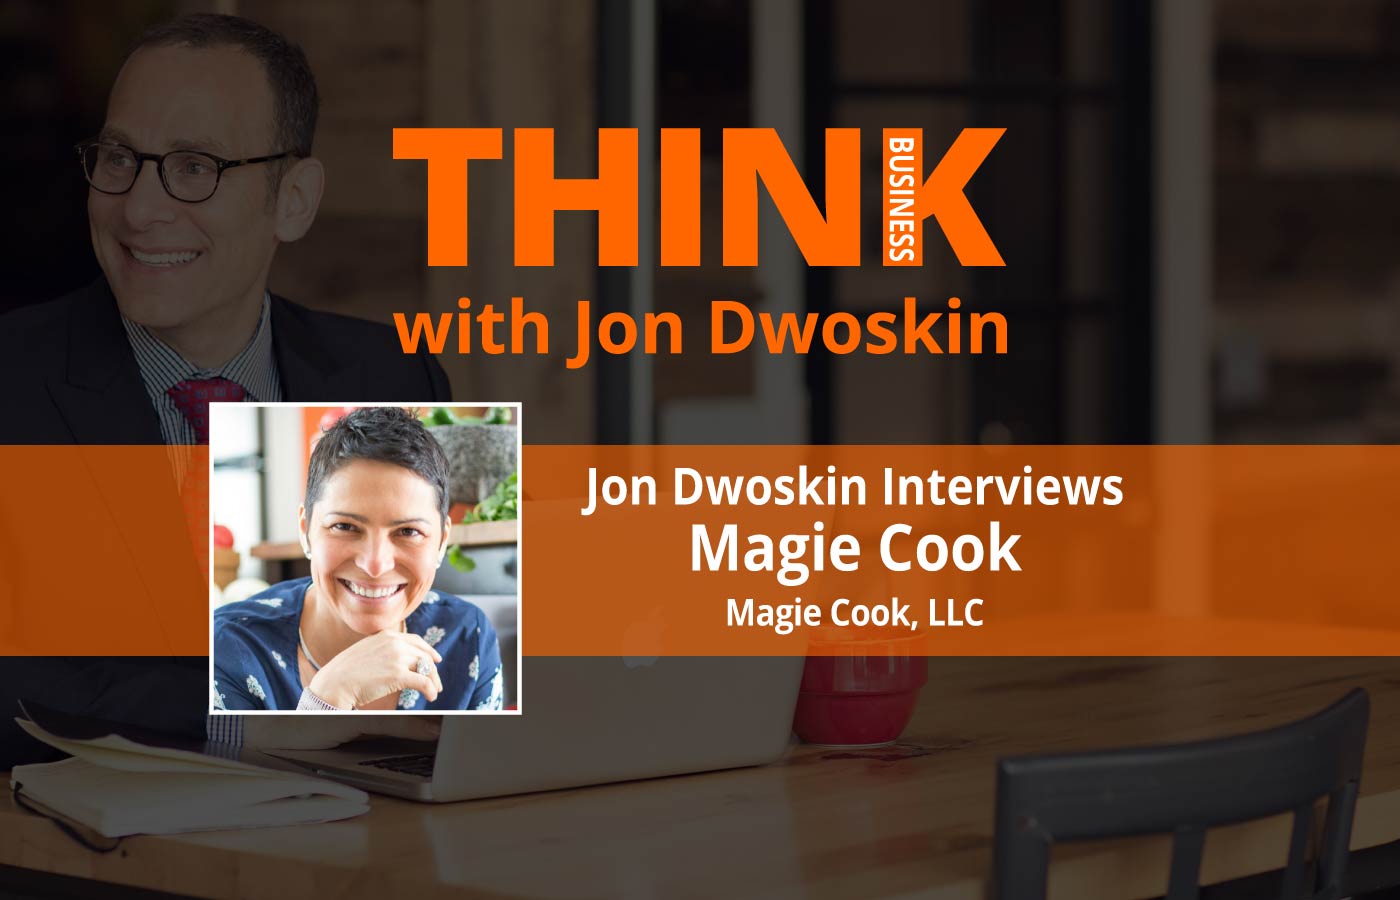 THINK Business Podcast: Jon Dwoskin Interviews Magie Cook of Magie Cook, LLC